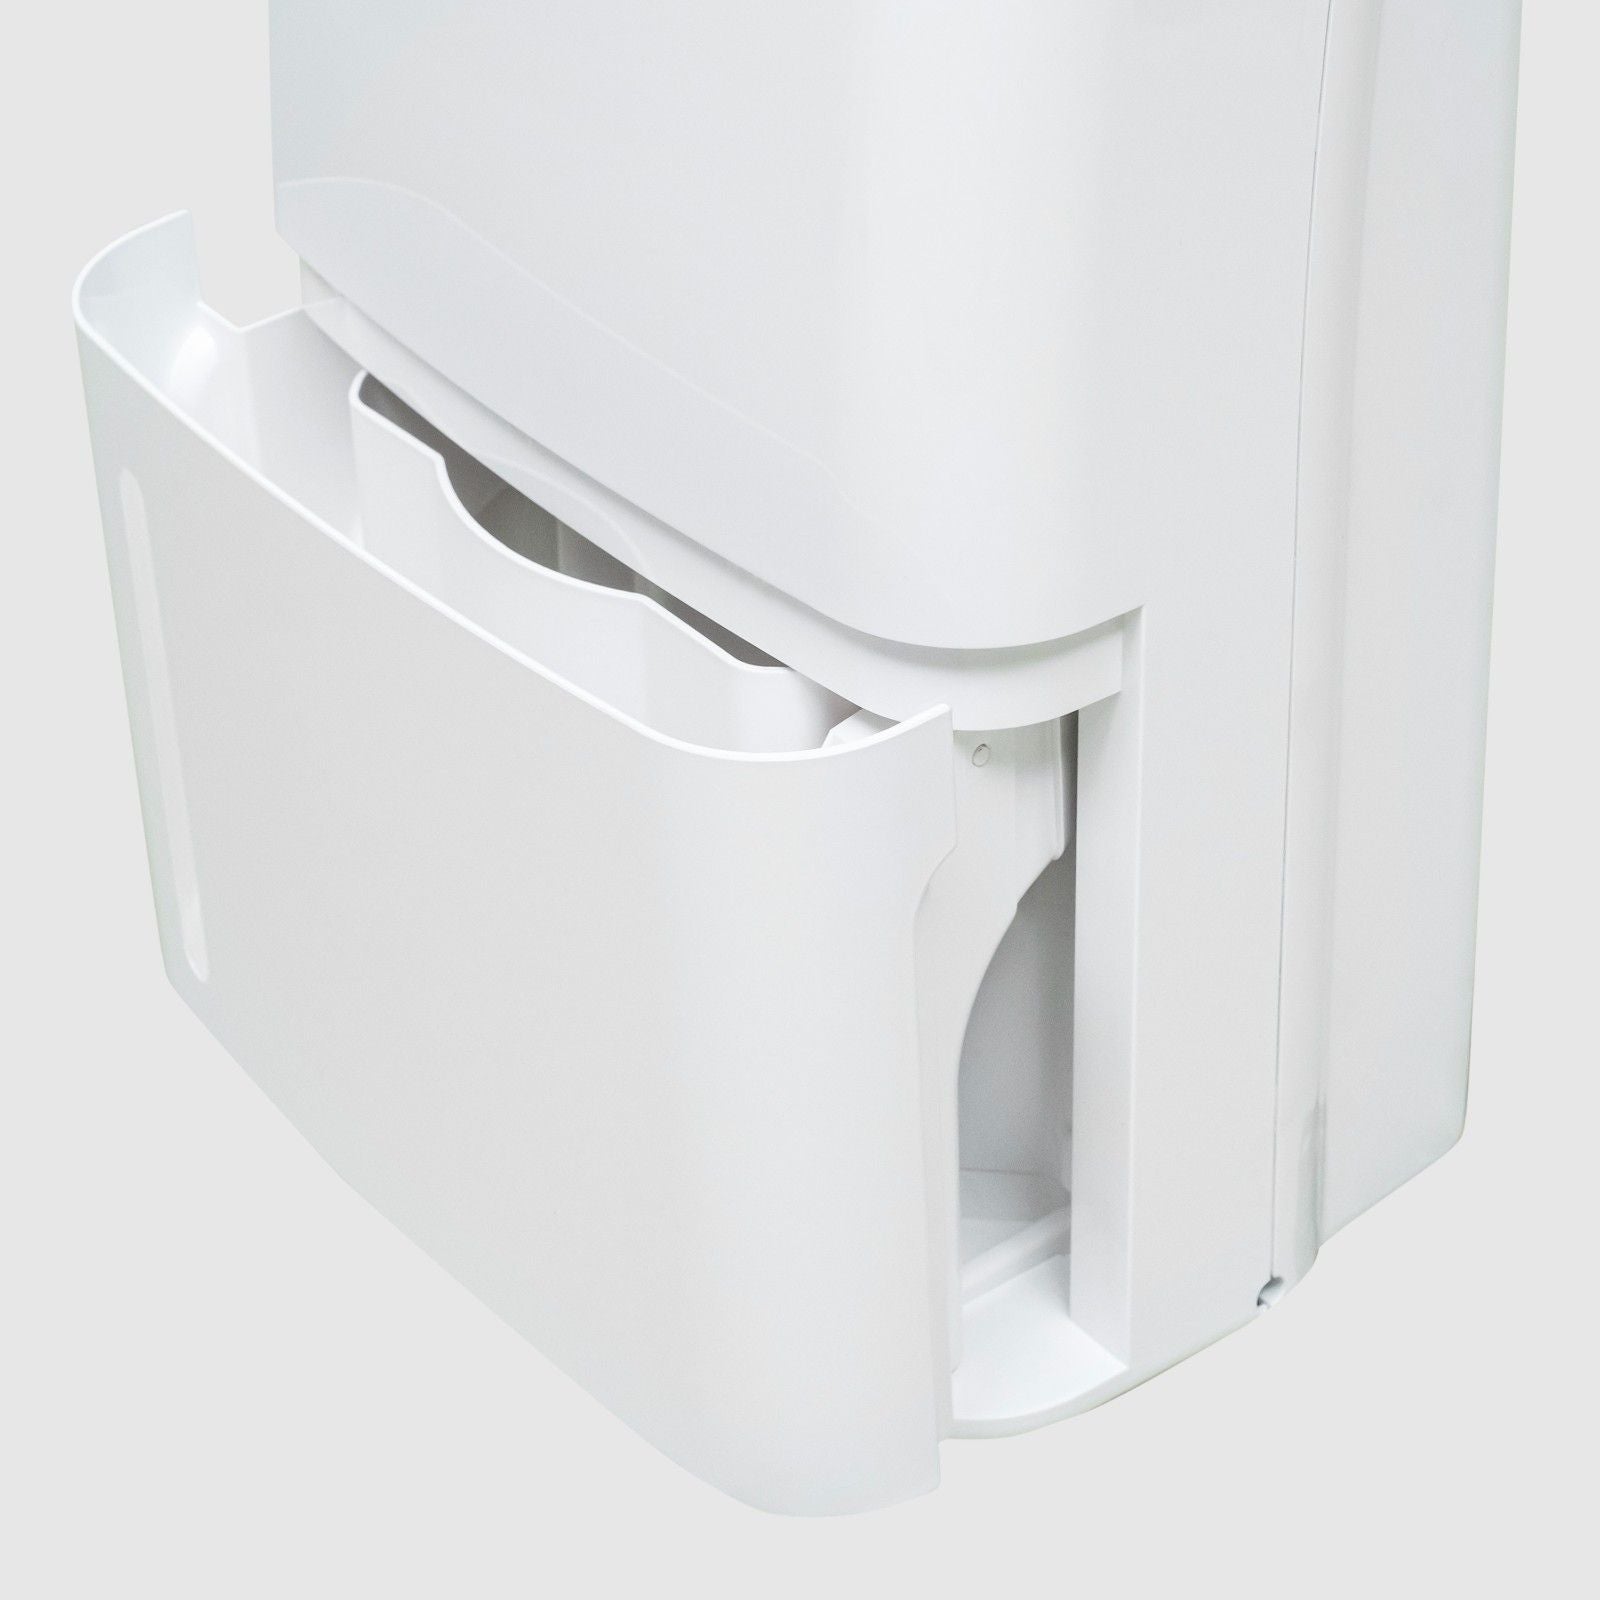 Close-up view of the White Westinghouse Dehumidifier WDE702 with the water tank partially removed, showcasing the easy-access water tank compartment. The sleek white design is suitable for maintaining optimal humidity levels in residential and commercial spaces.